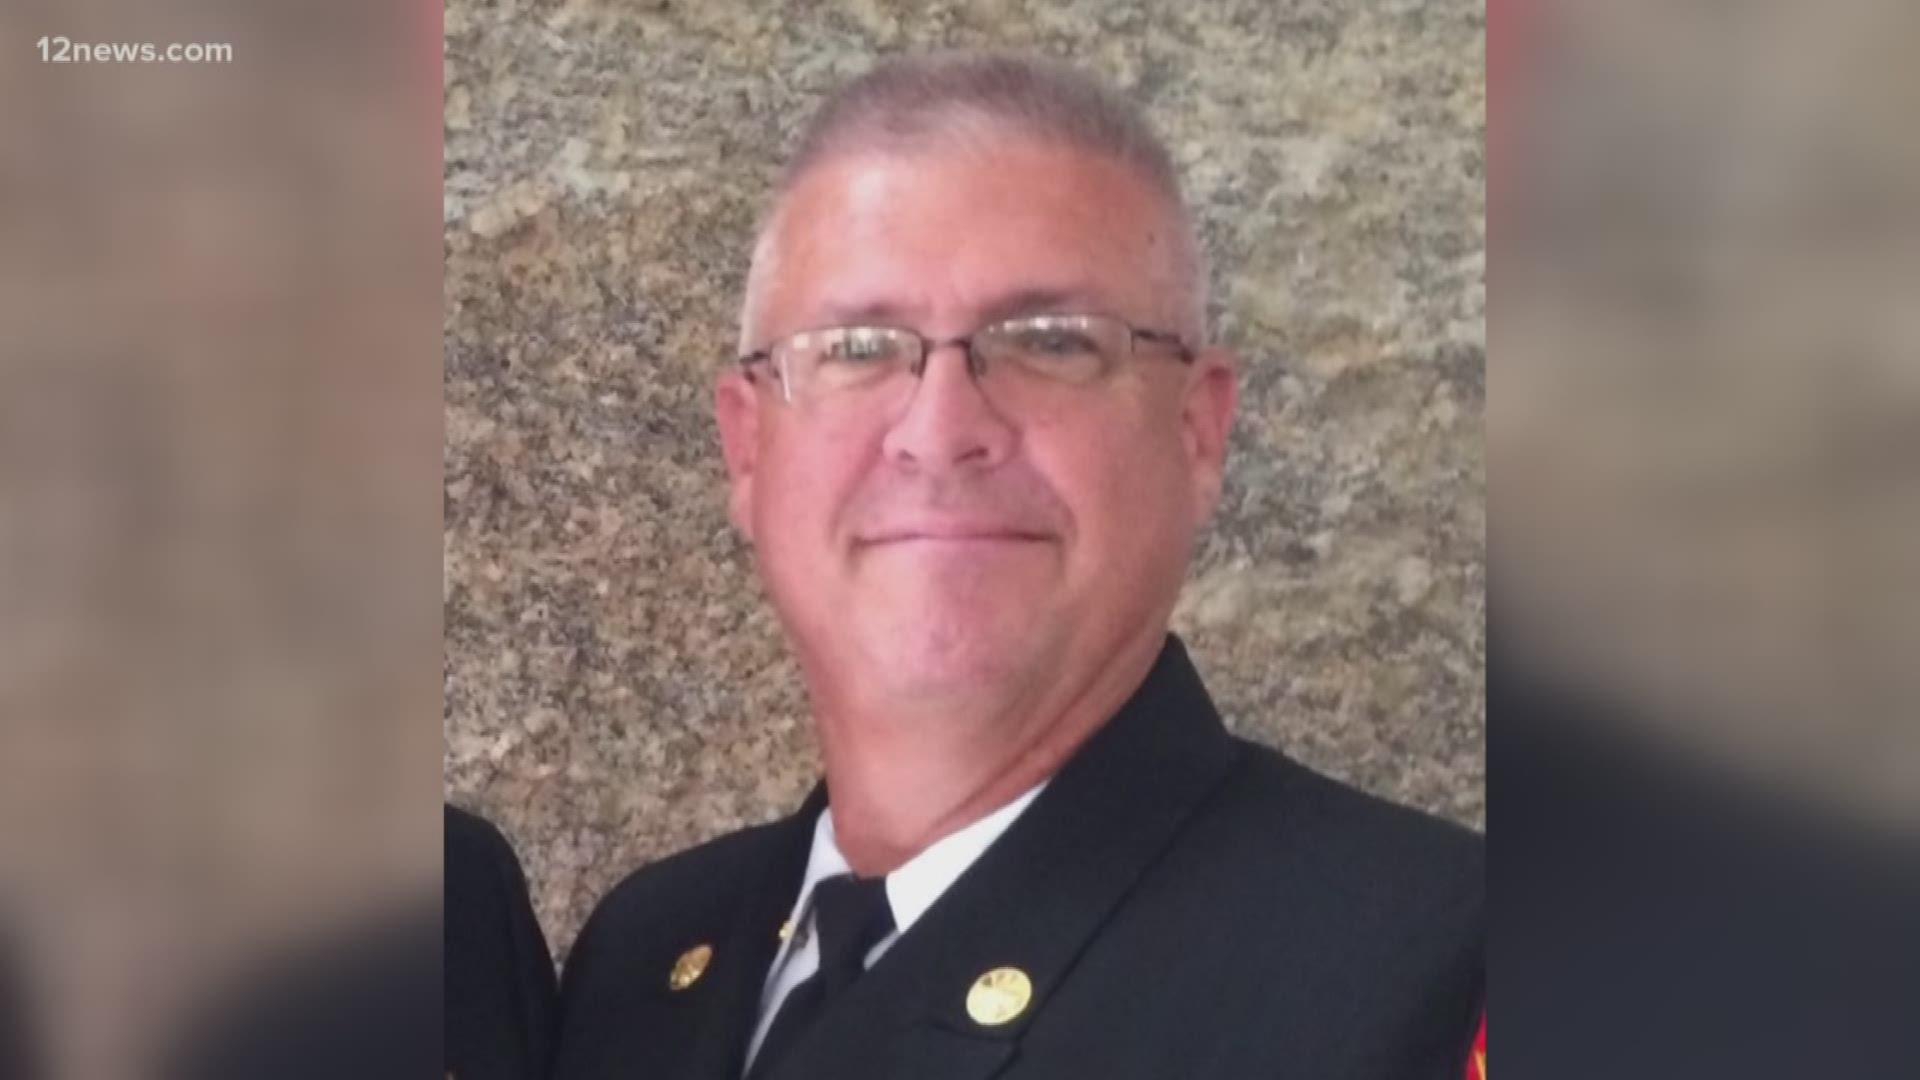 The Buckeye Police Department revealed that the victim of a crash Saturday was recently retired Dep. Chief Eric Merrill.